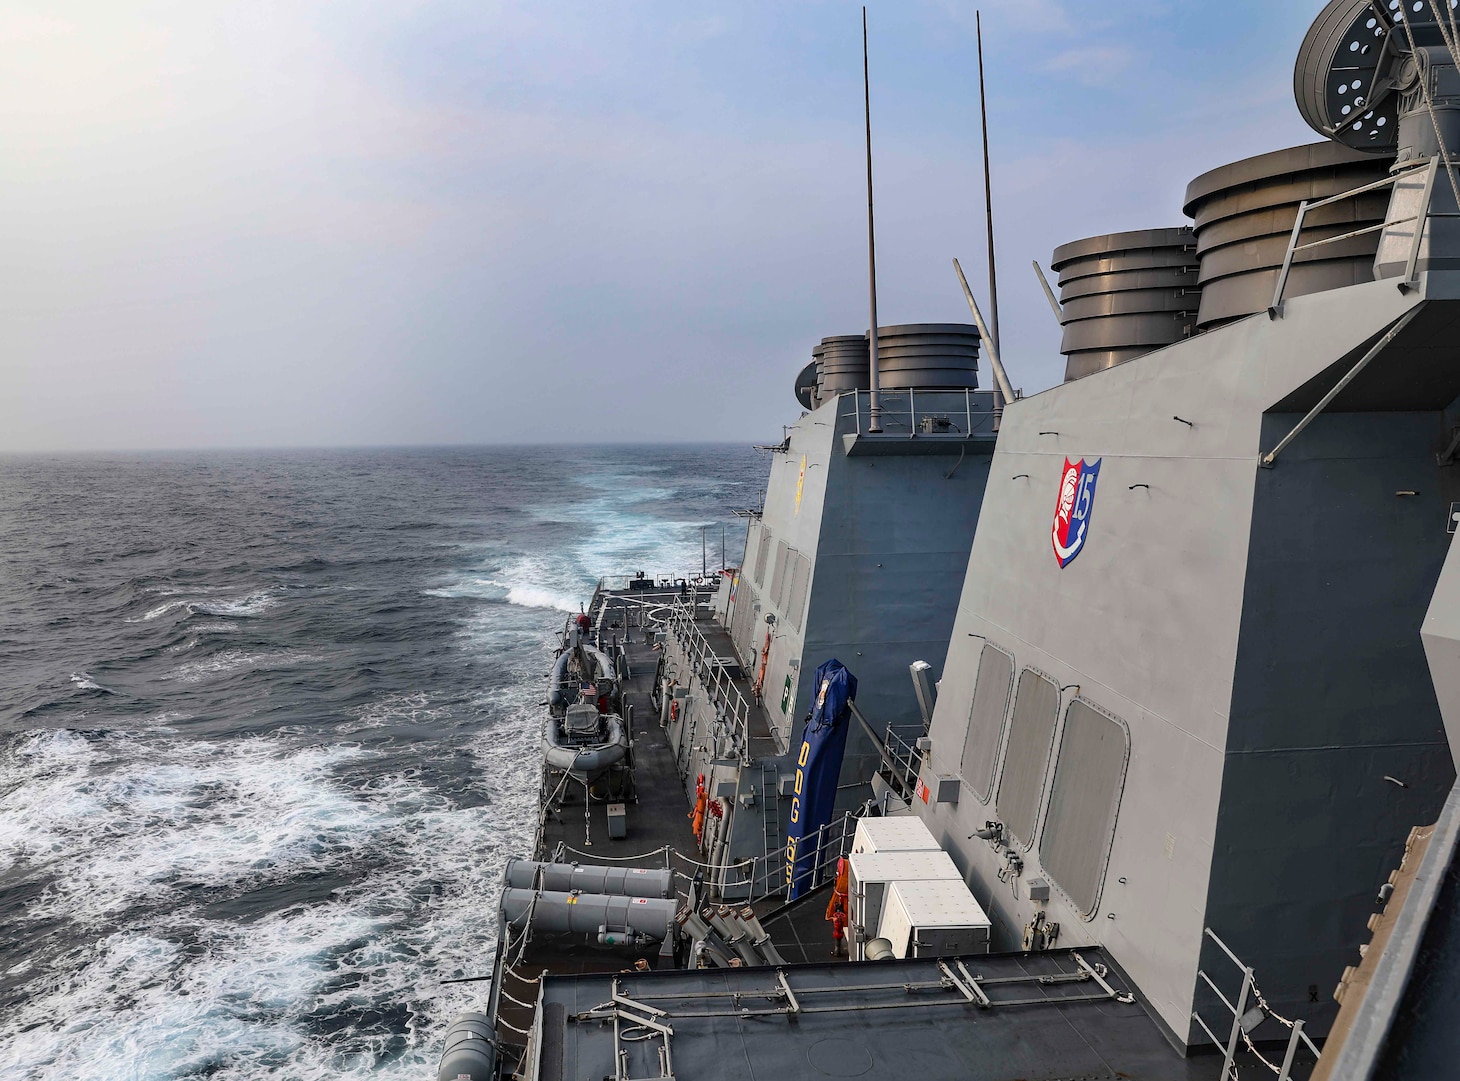 210728-N-FO714-1038 TAIWAN STRAIT (July 28, 2021) The Arleigh Burke-class guided-missile destroyer USS Benfold (DDG 65) transits the Taiwan Strait while conducting routine underway operations. Benfold is forward-deployed to the U.S. 7th Fleet area of operations in support of a free and open Indo-Pacific. (U.S. Navy photo by Mass Communication Specialist 1st Class Deanna C. Gonzales)